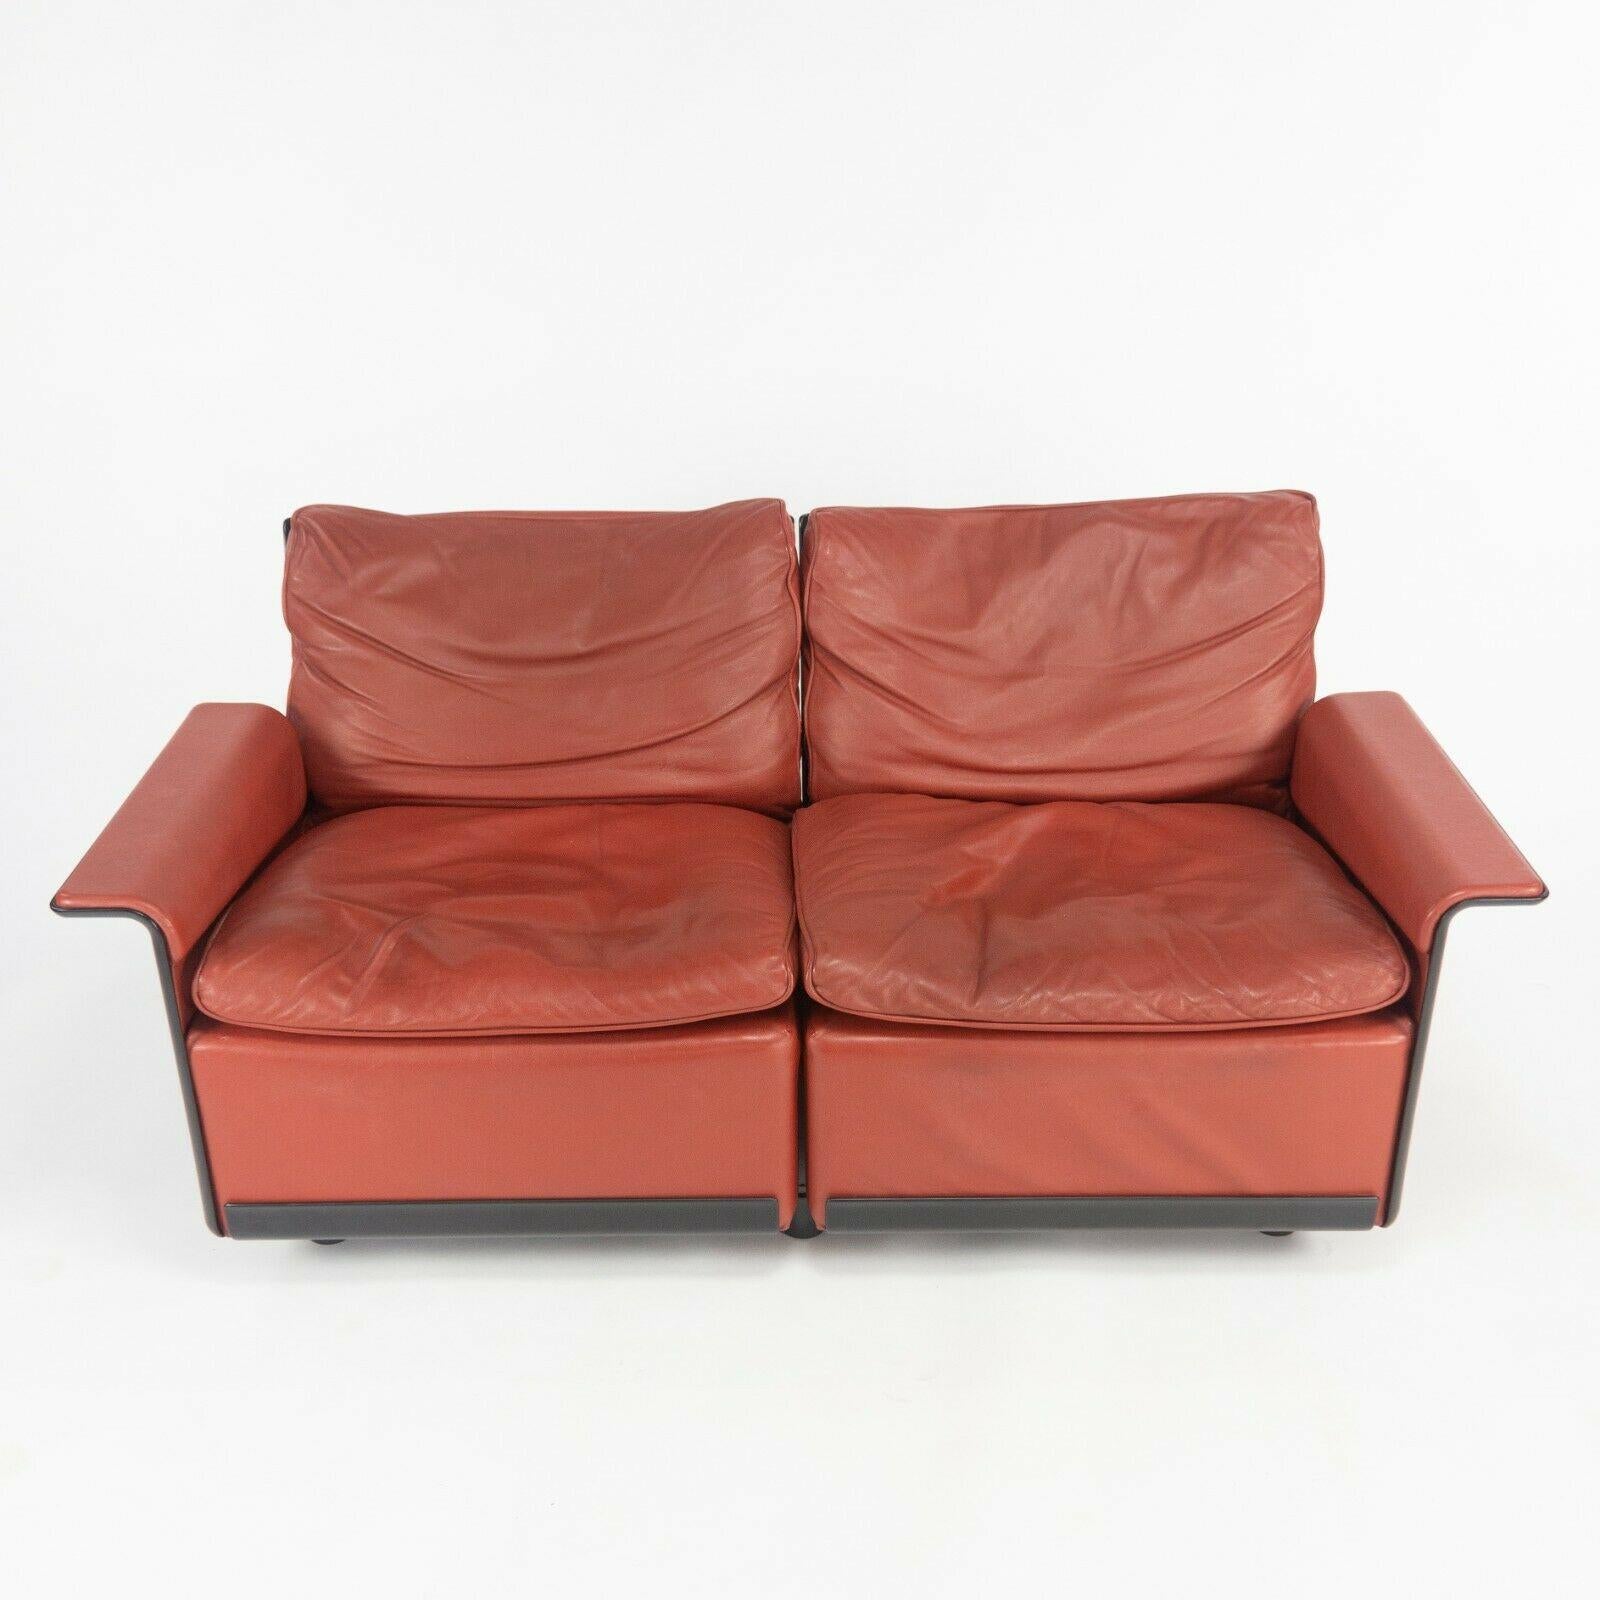 1980s Vintage Dieter Rams for Vitsoe 620 Red Leather and Black Two Seat Settee For Sale 2